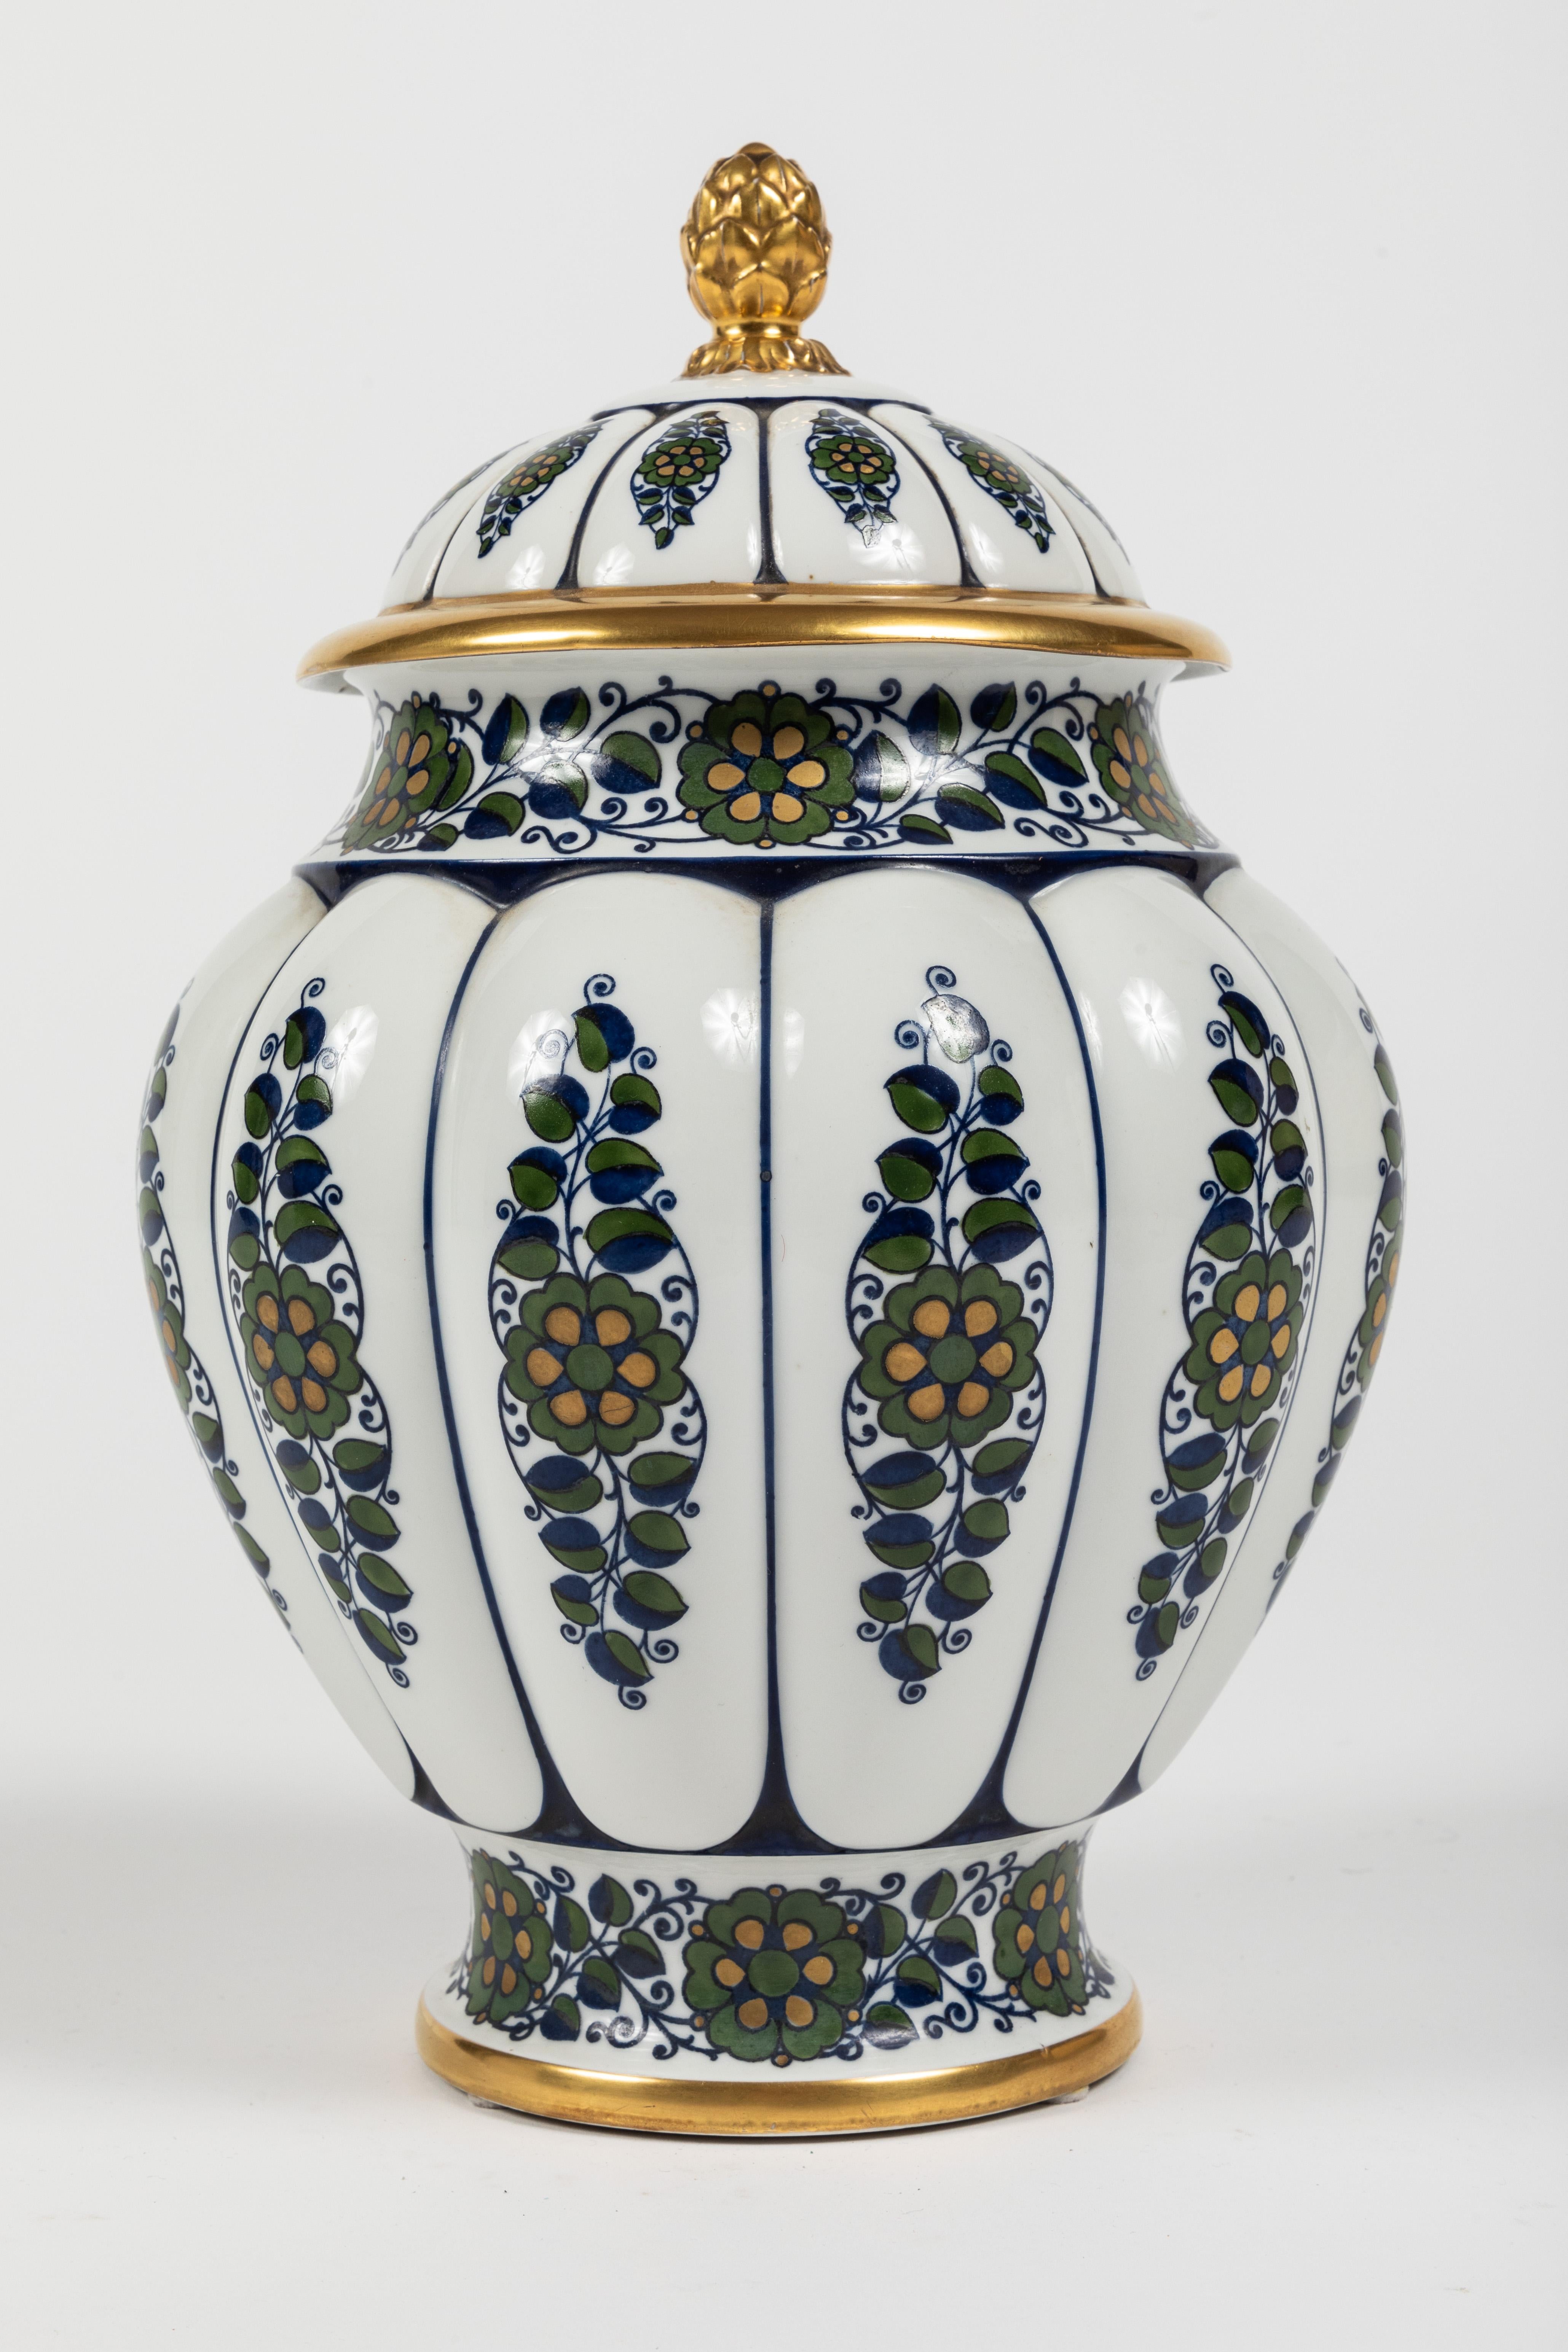 A wonderful lidded urn with blue and green floral decoration and finished with gilt gold accents by Krautheim China. After researching it appears this mark dates to around the turn of the century. The style would also indicate a nod to the turn of